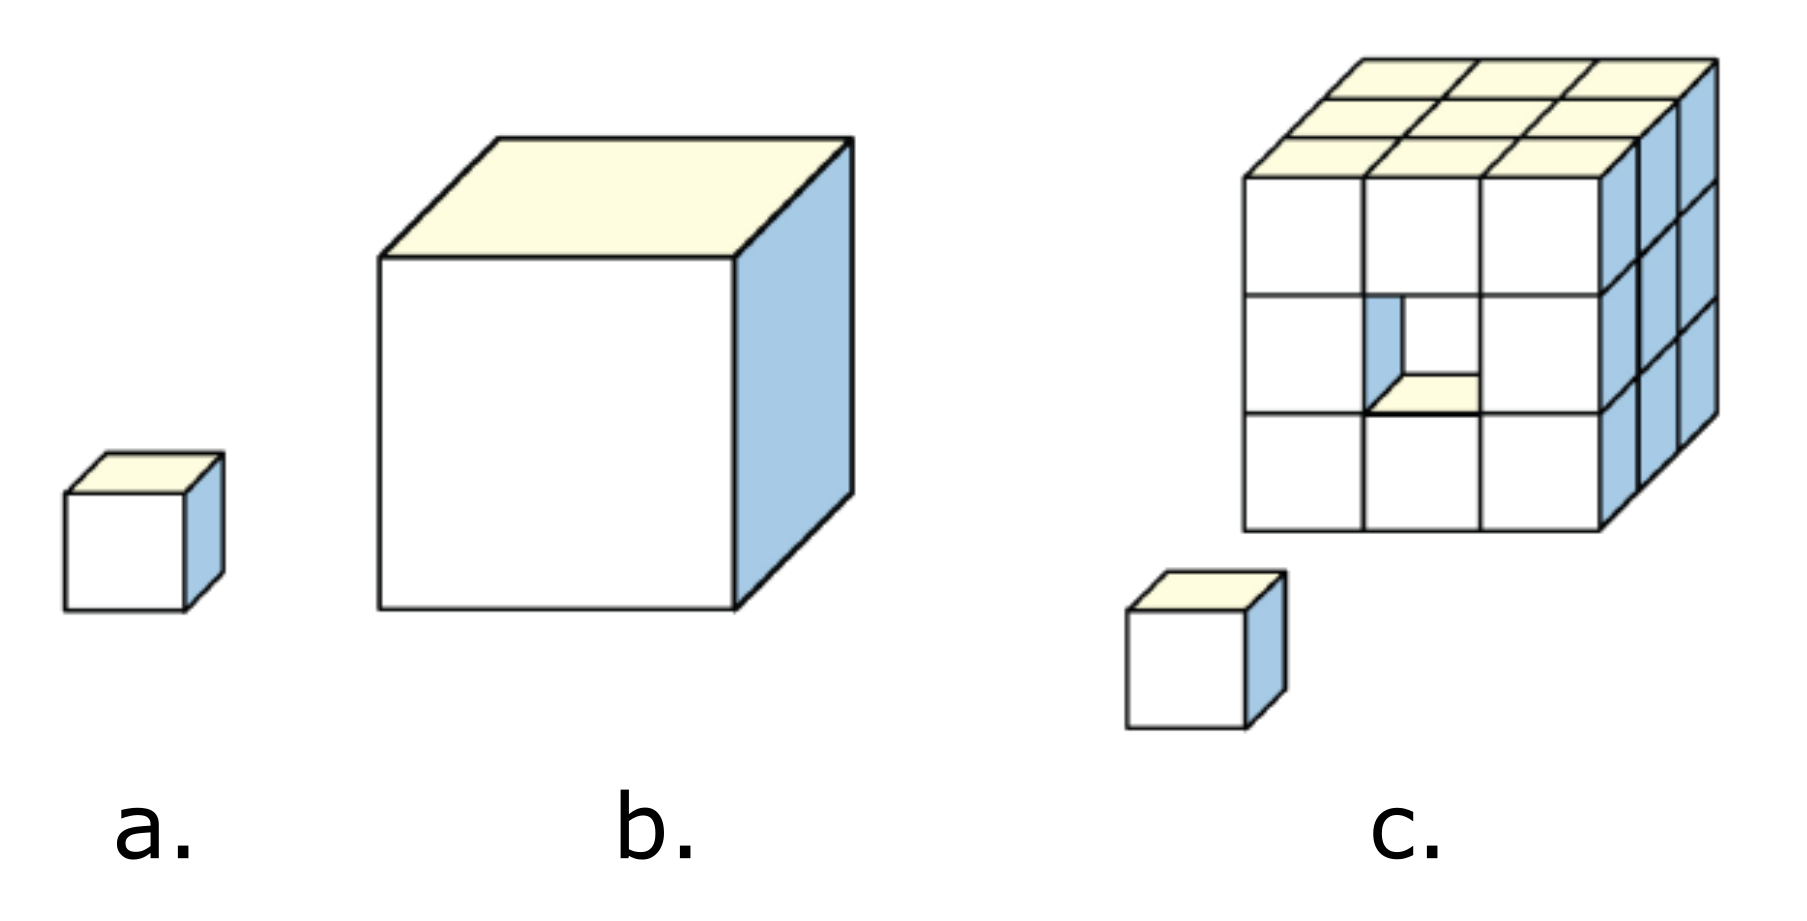 A small cell (image a), has a larger surface area to volume ratio than a bigger cell (image b). In order to imaintain a large surface area to volume ratio, certain organisms become multicellular (image c).